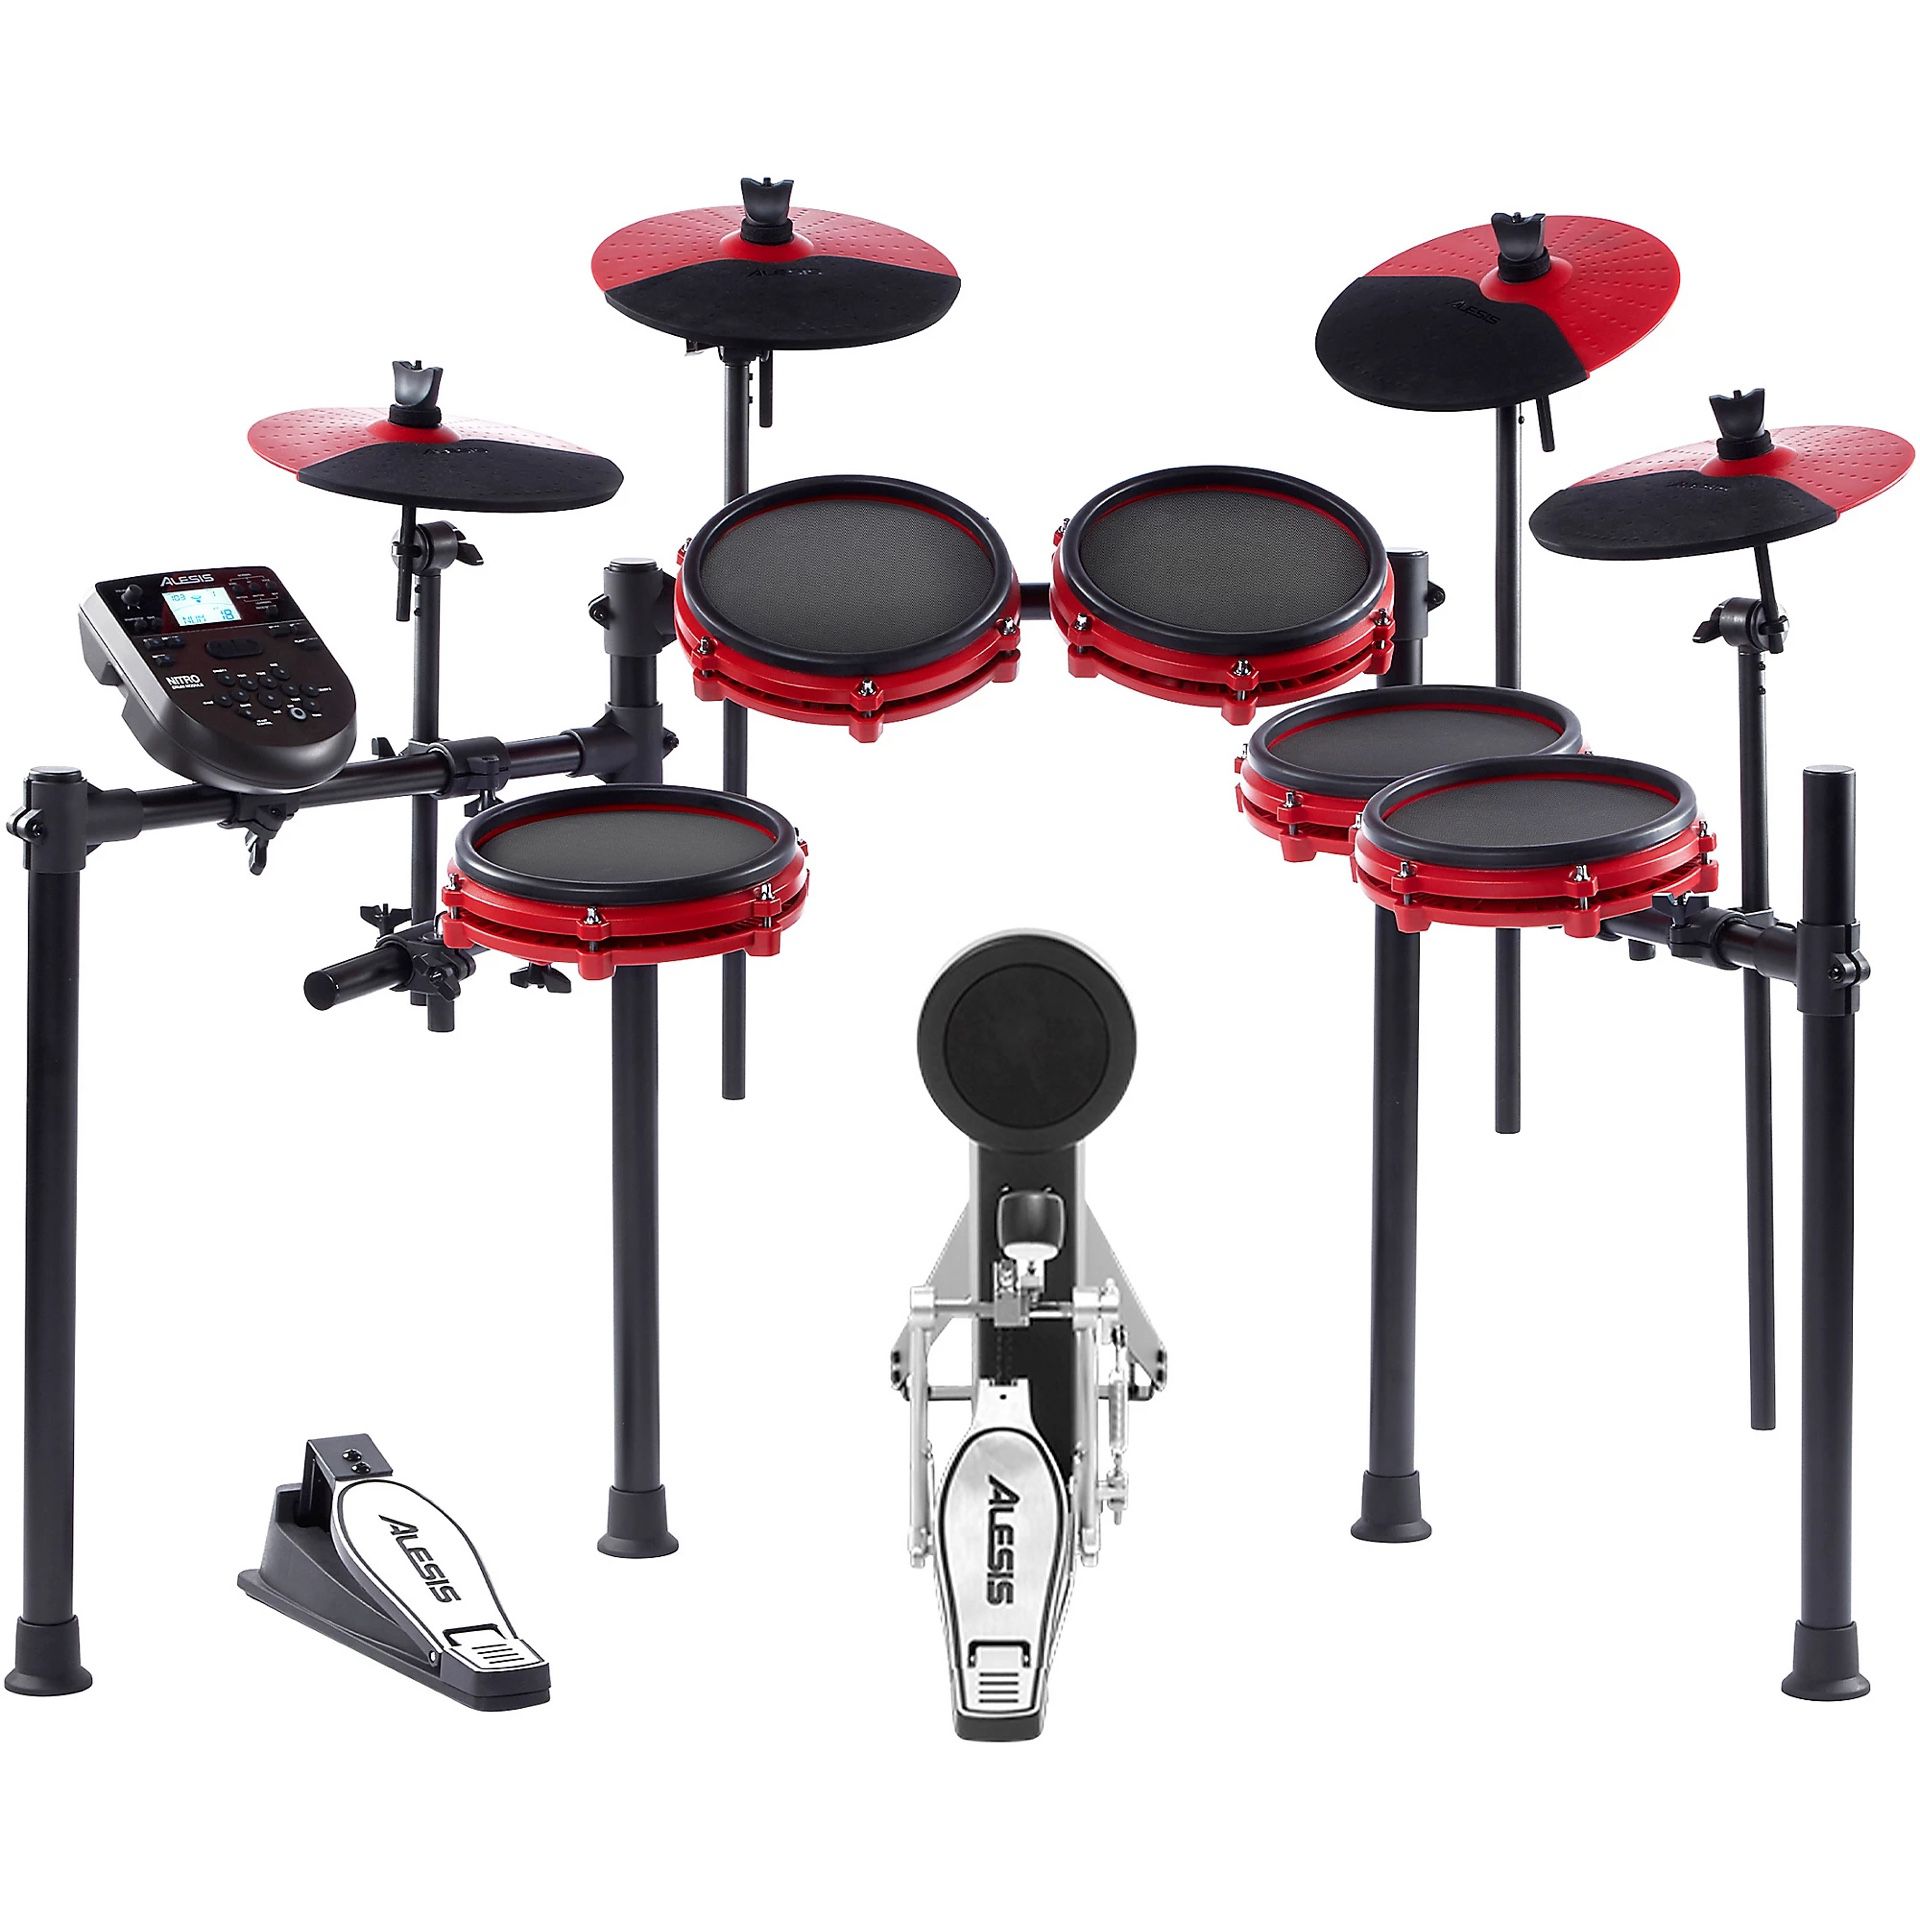  10-Piece Expanded Electronic Drum Set